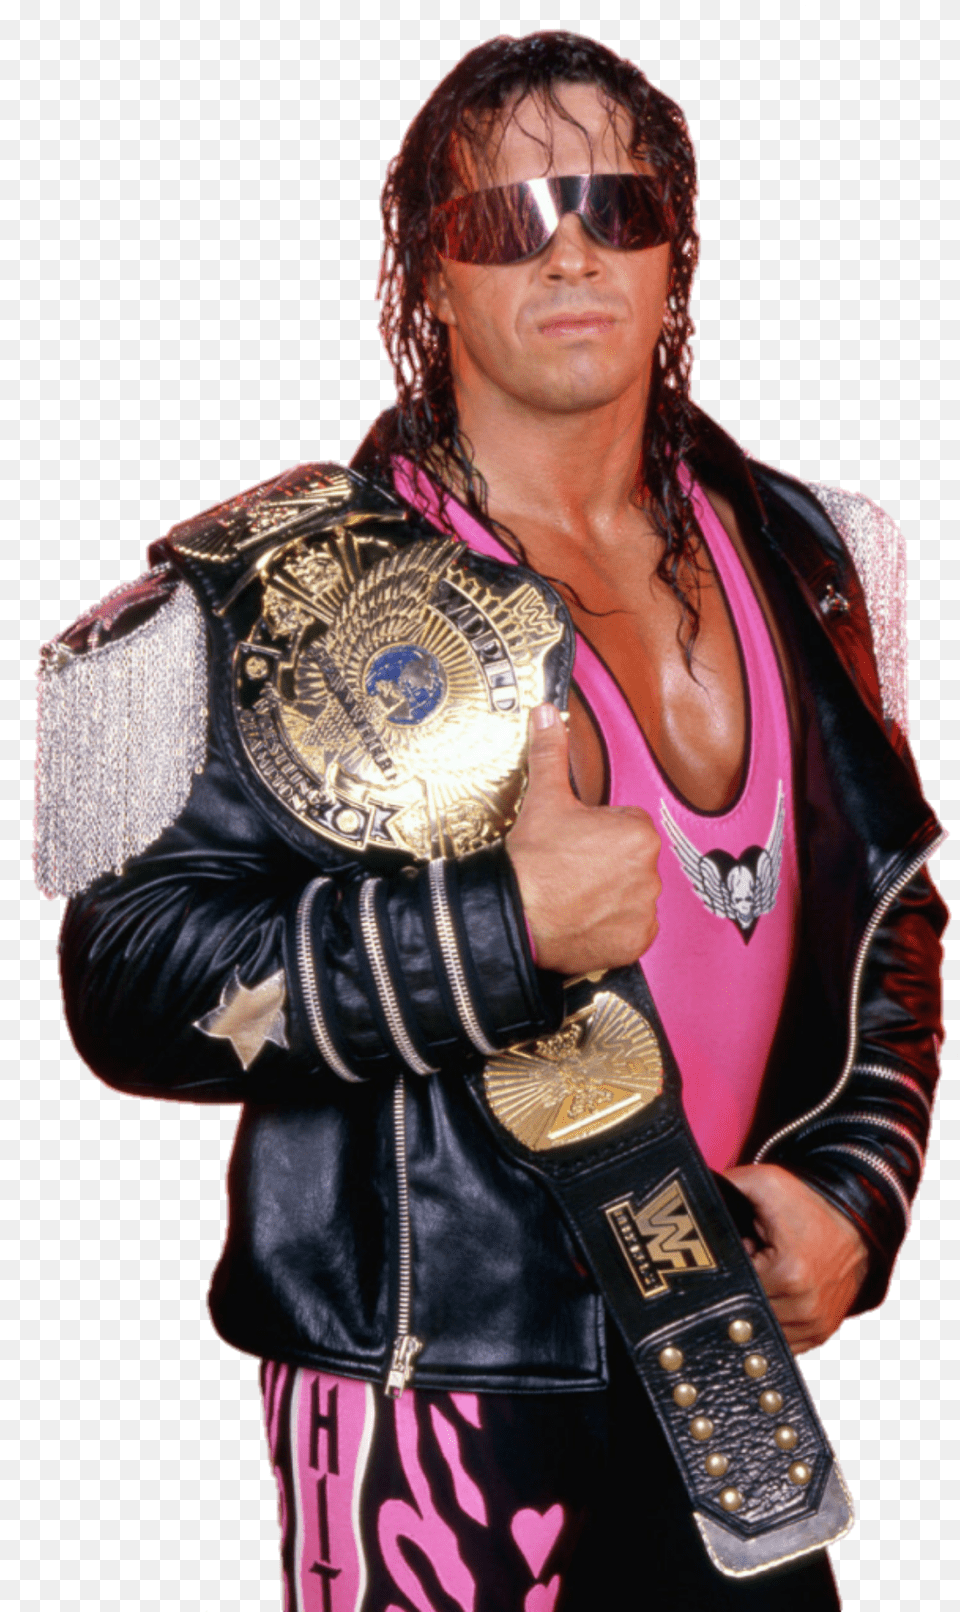 Image Id Bret The Hitman Hart Wwe Wcw Signed Autographed, Accessories, Jacket, Sunglasses, Coat Png